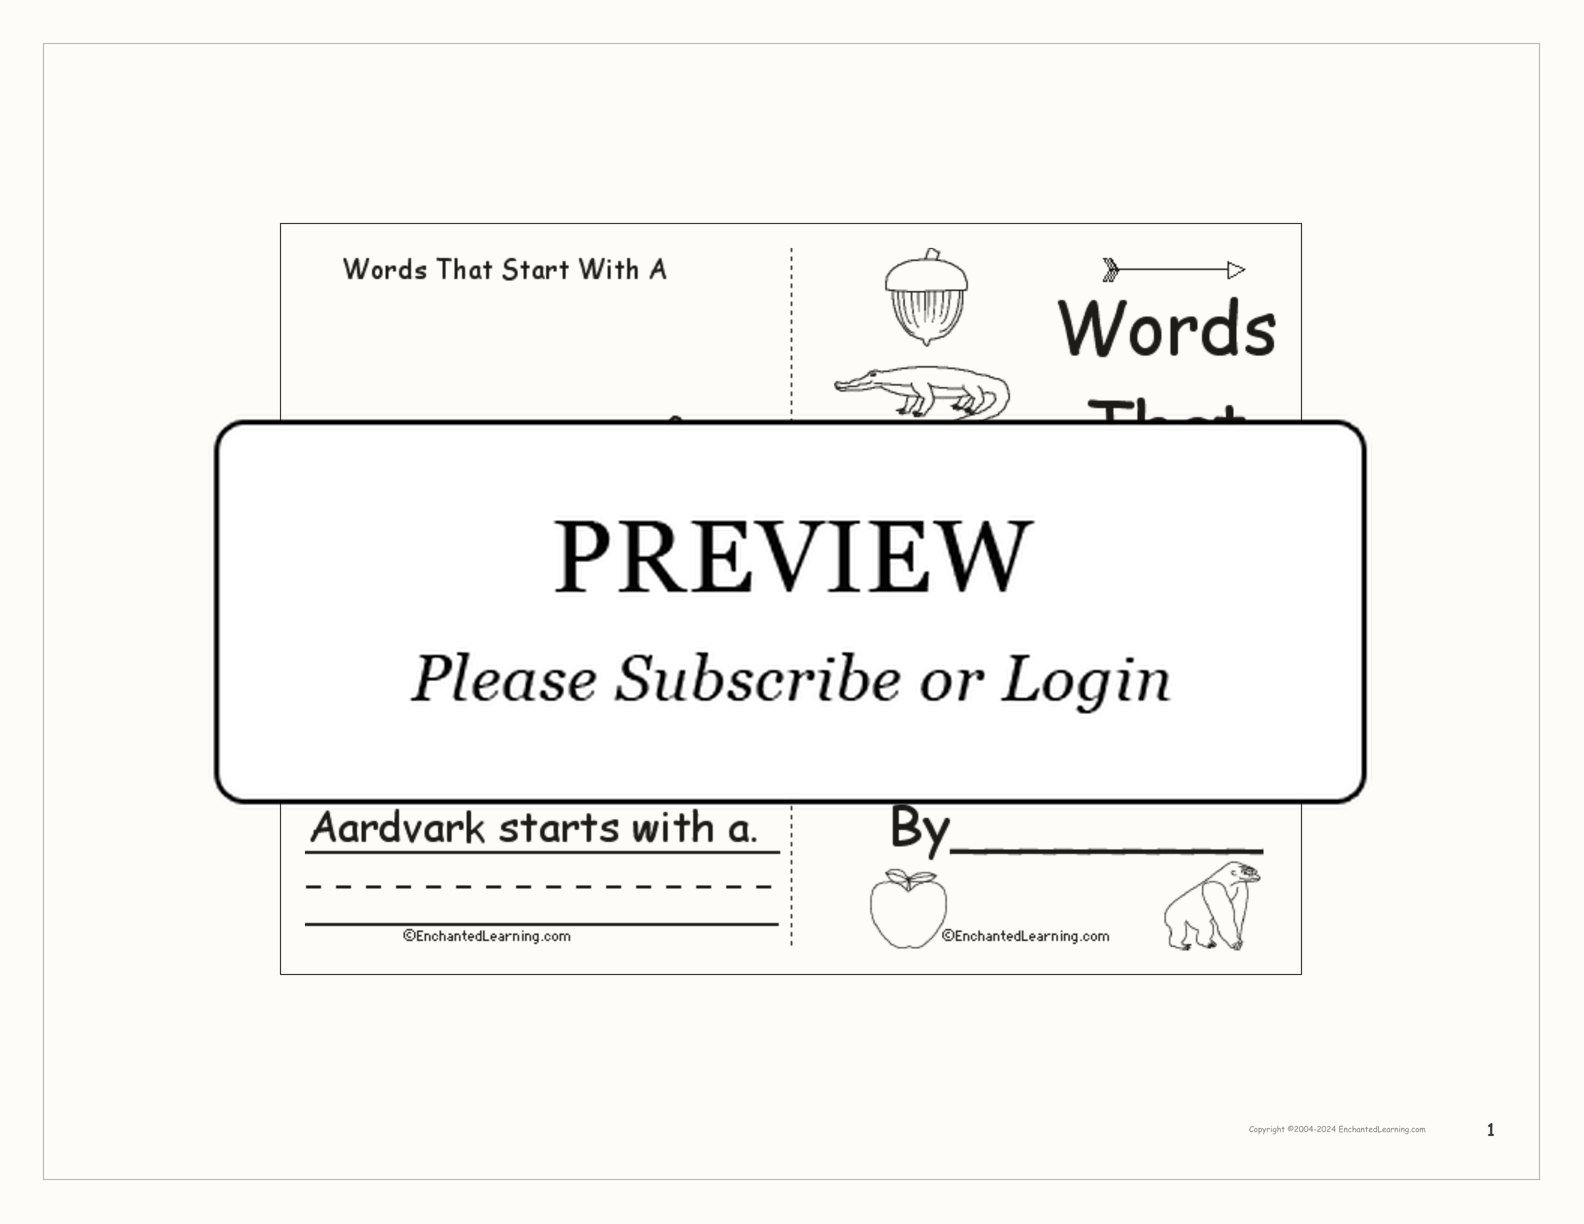 Words That Start With A interactive printout page 1